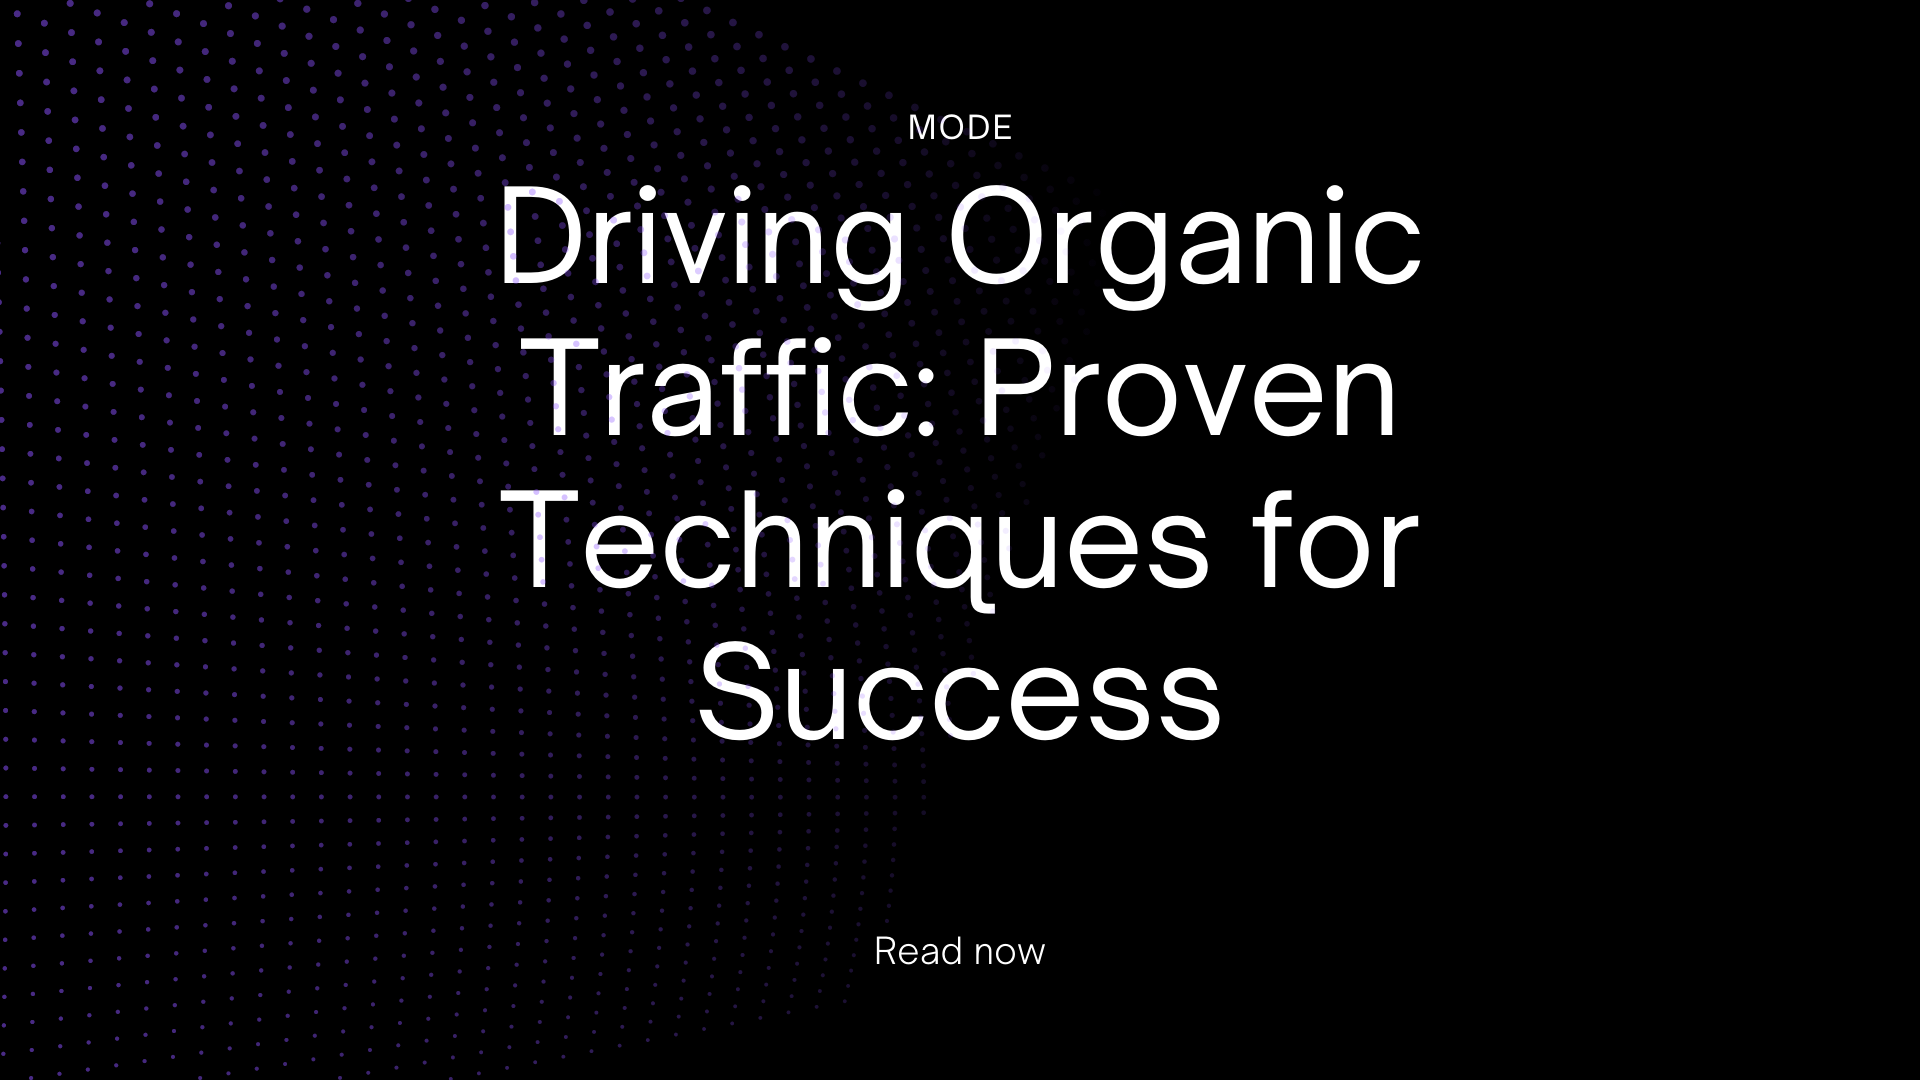 Driving Organic Traffic: Proven Techniques for Success